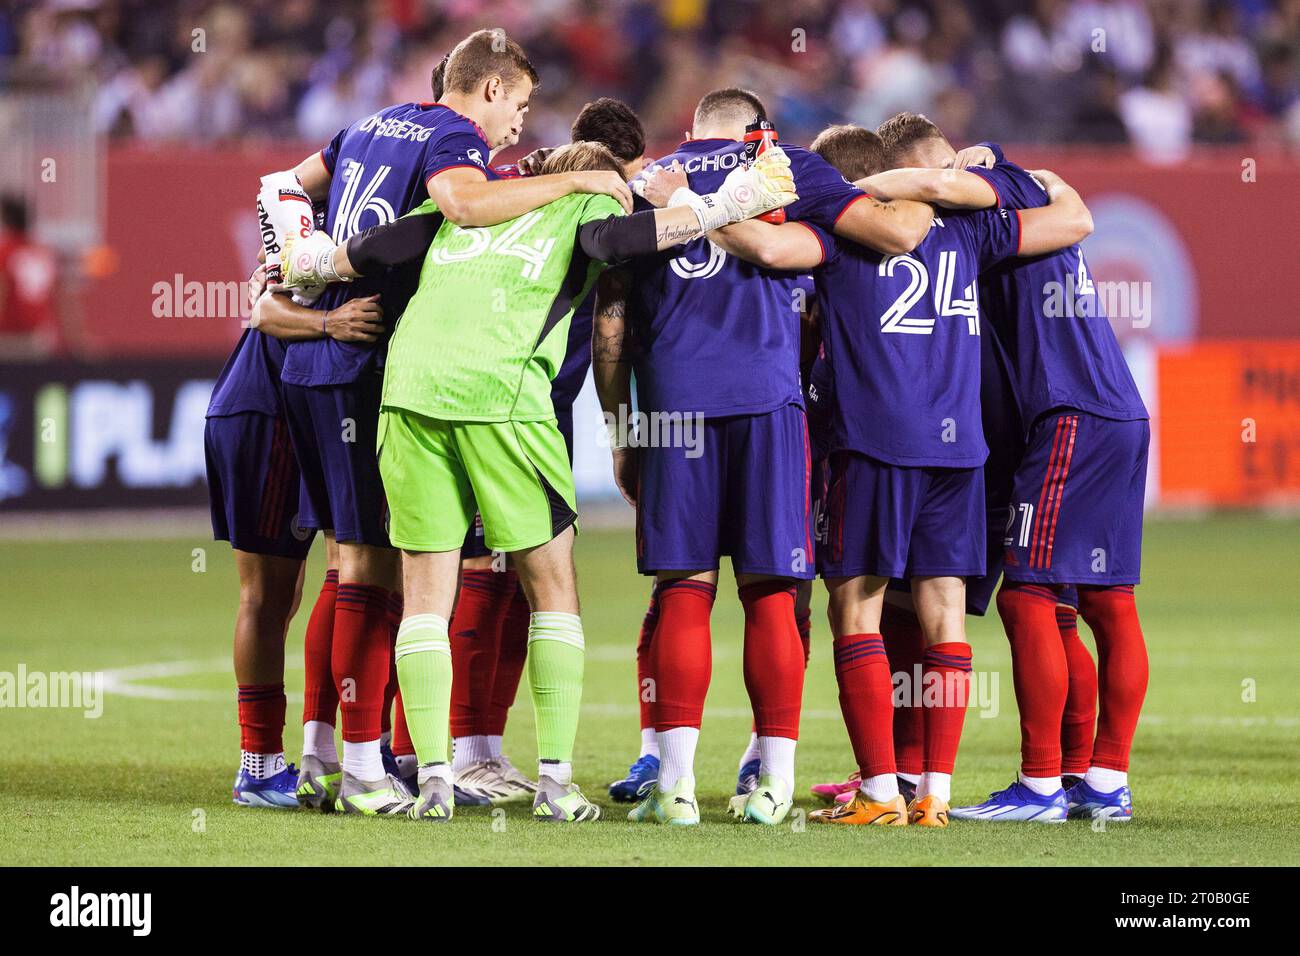 Chicago, Illinois, USA. 04th Oct, 2023. Chicago Fire FC huddles prior to MLS Soccer match action between Inter Miami FC and Chicago Fire FC at Soldier Field in Chicago, Illinois. Chicago Fire FC defeated Inter Miami FC 4-1. John Mersits/CSM/Alamy Live News Stock Photo